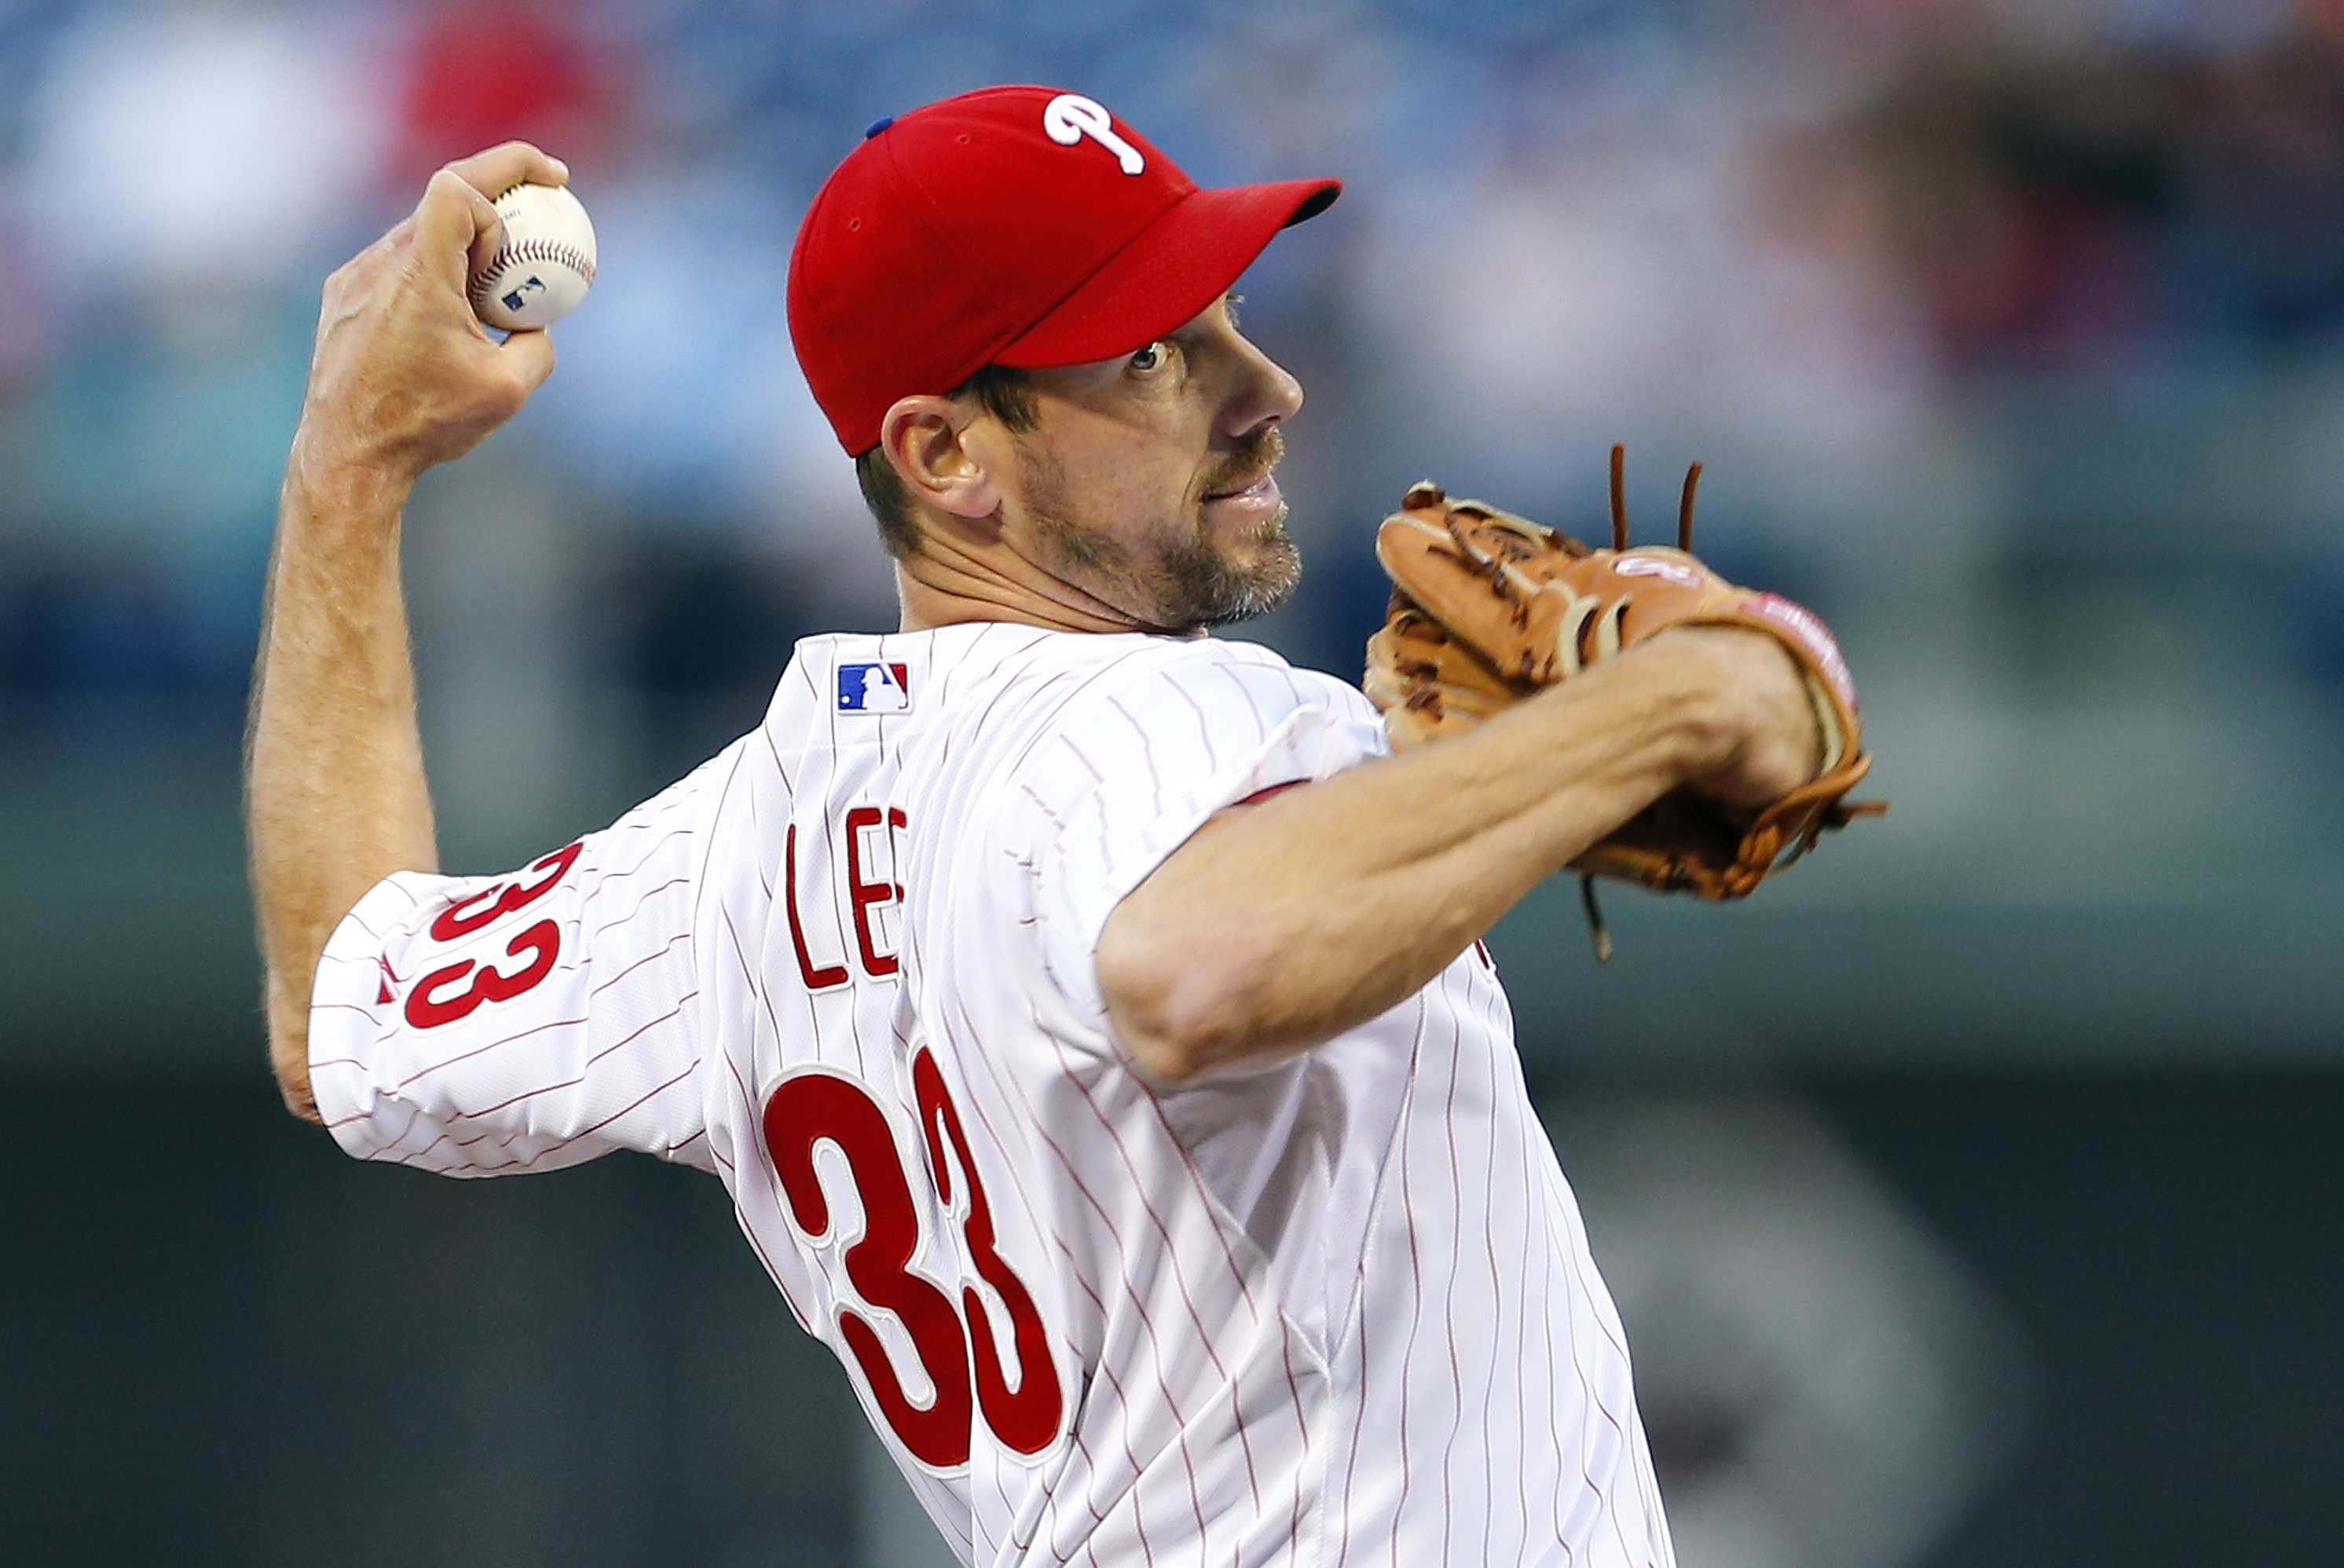 Phillies trade for Cliff Lee, remembering the deal ten years later